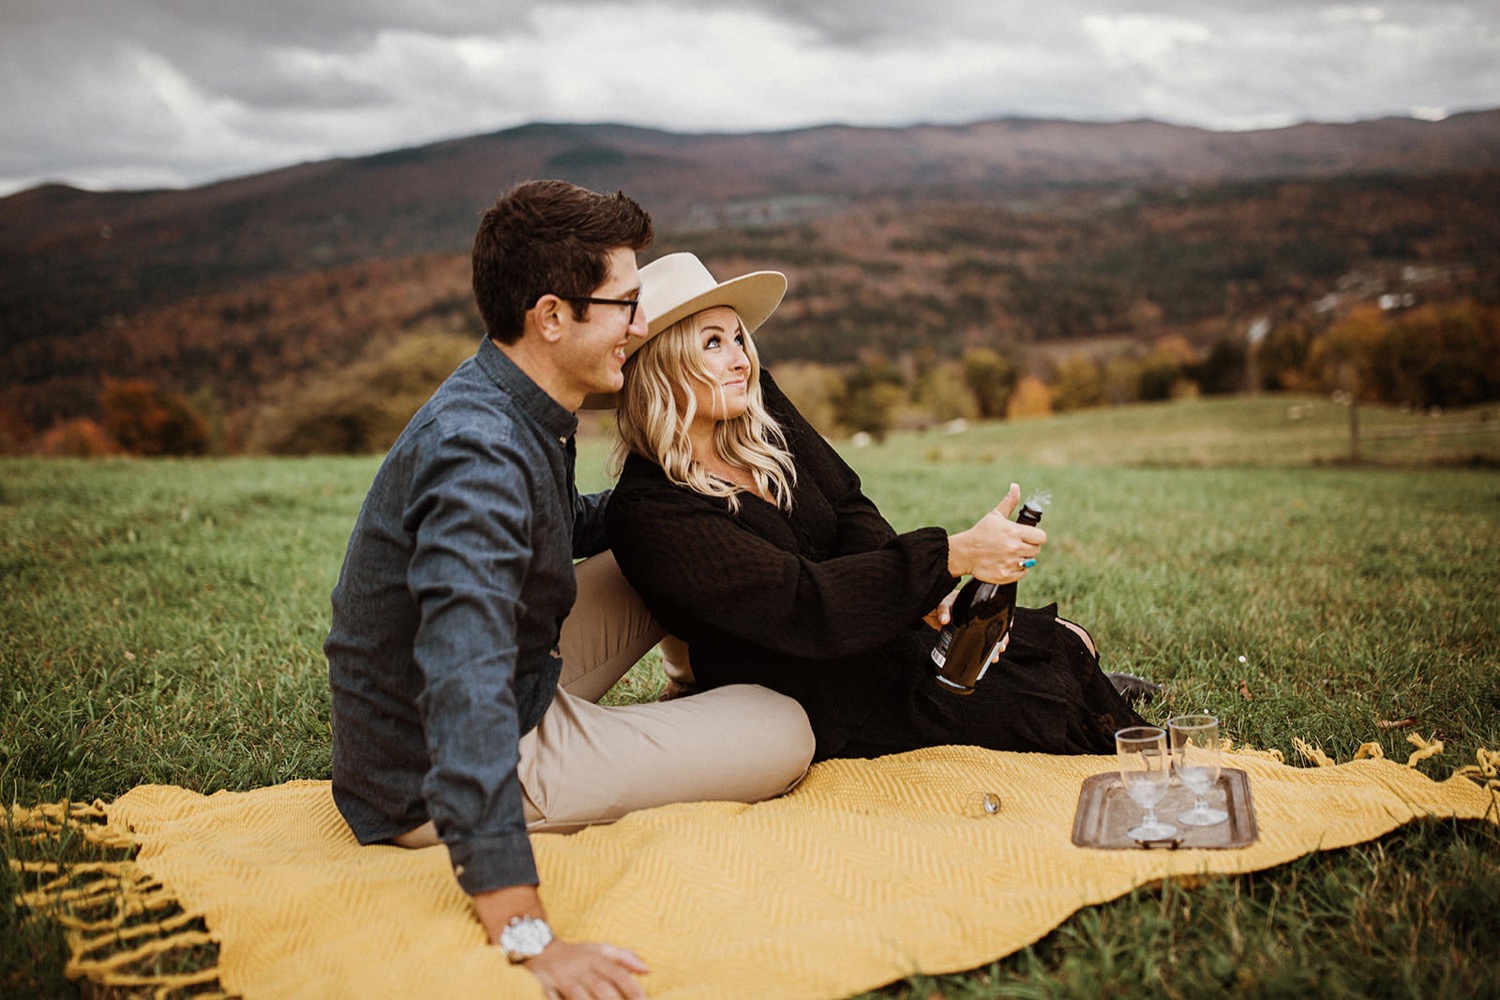 The Complete Guide to Spring Engagement Photos